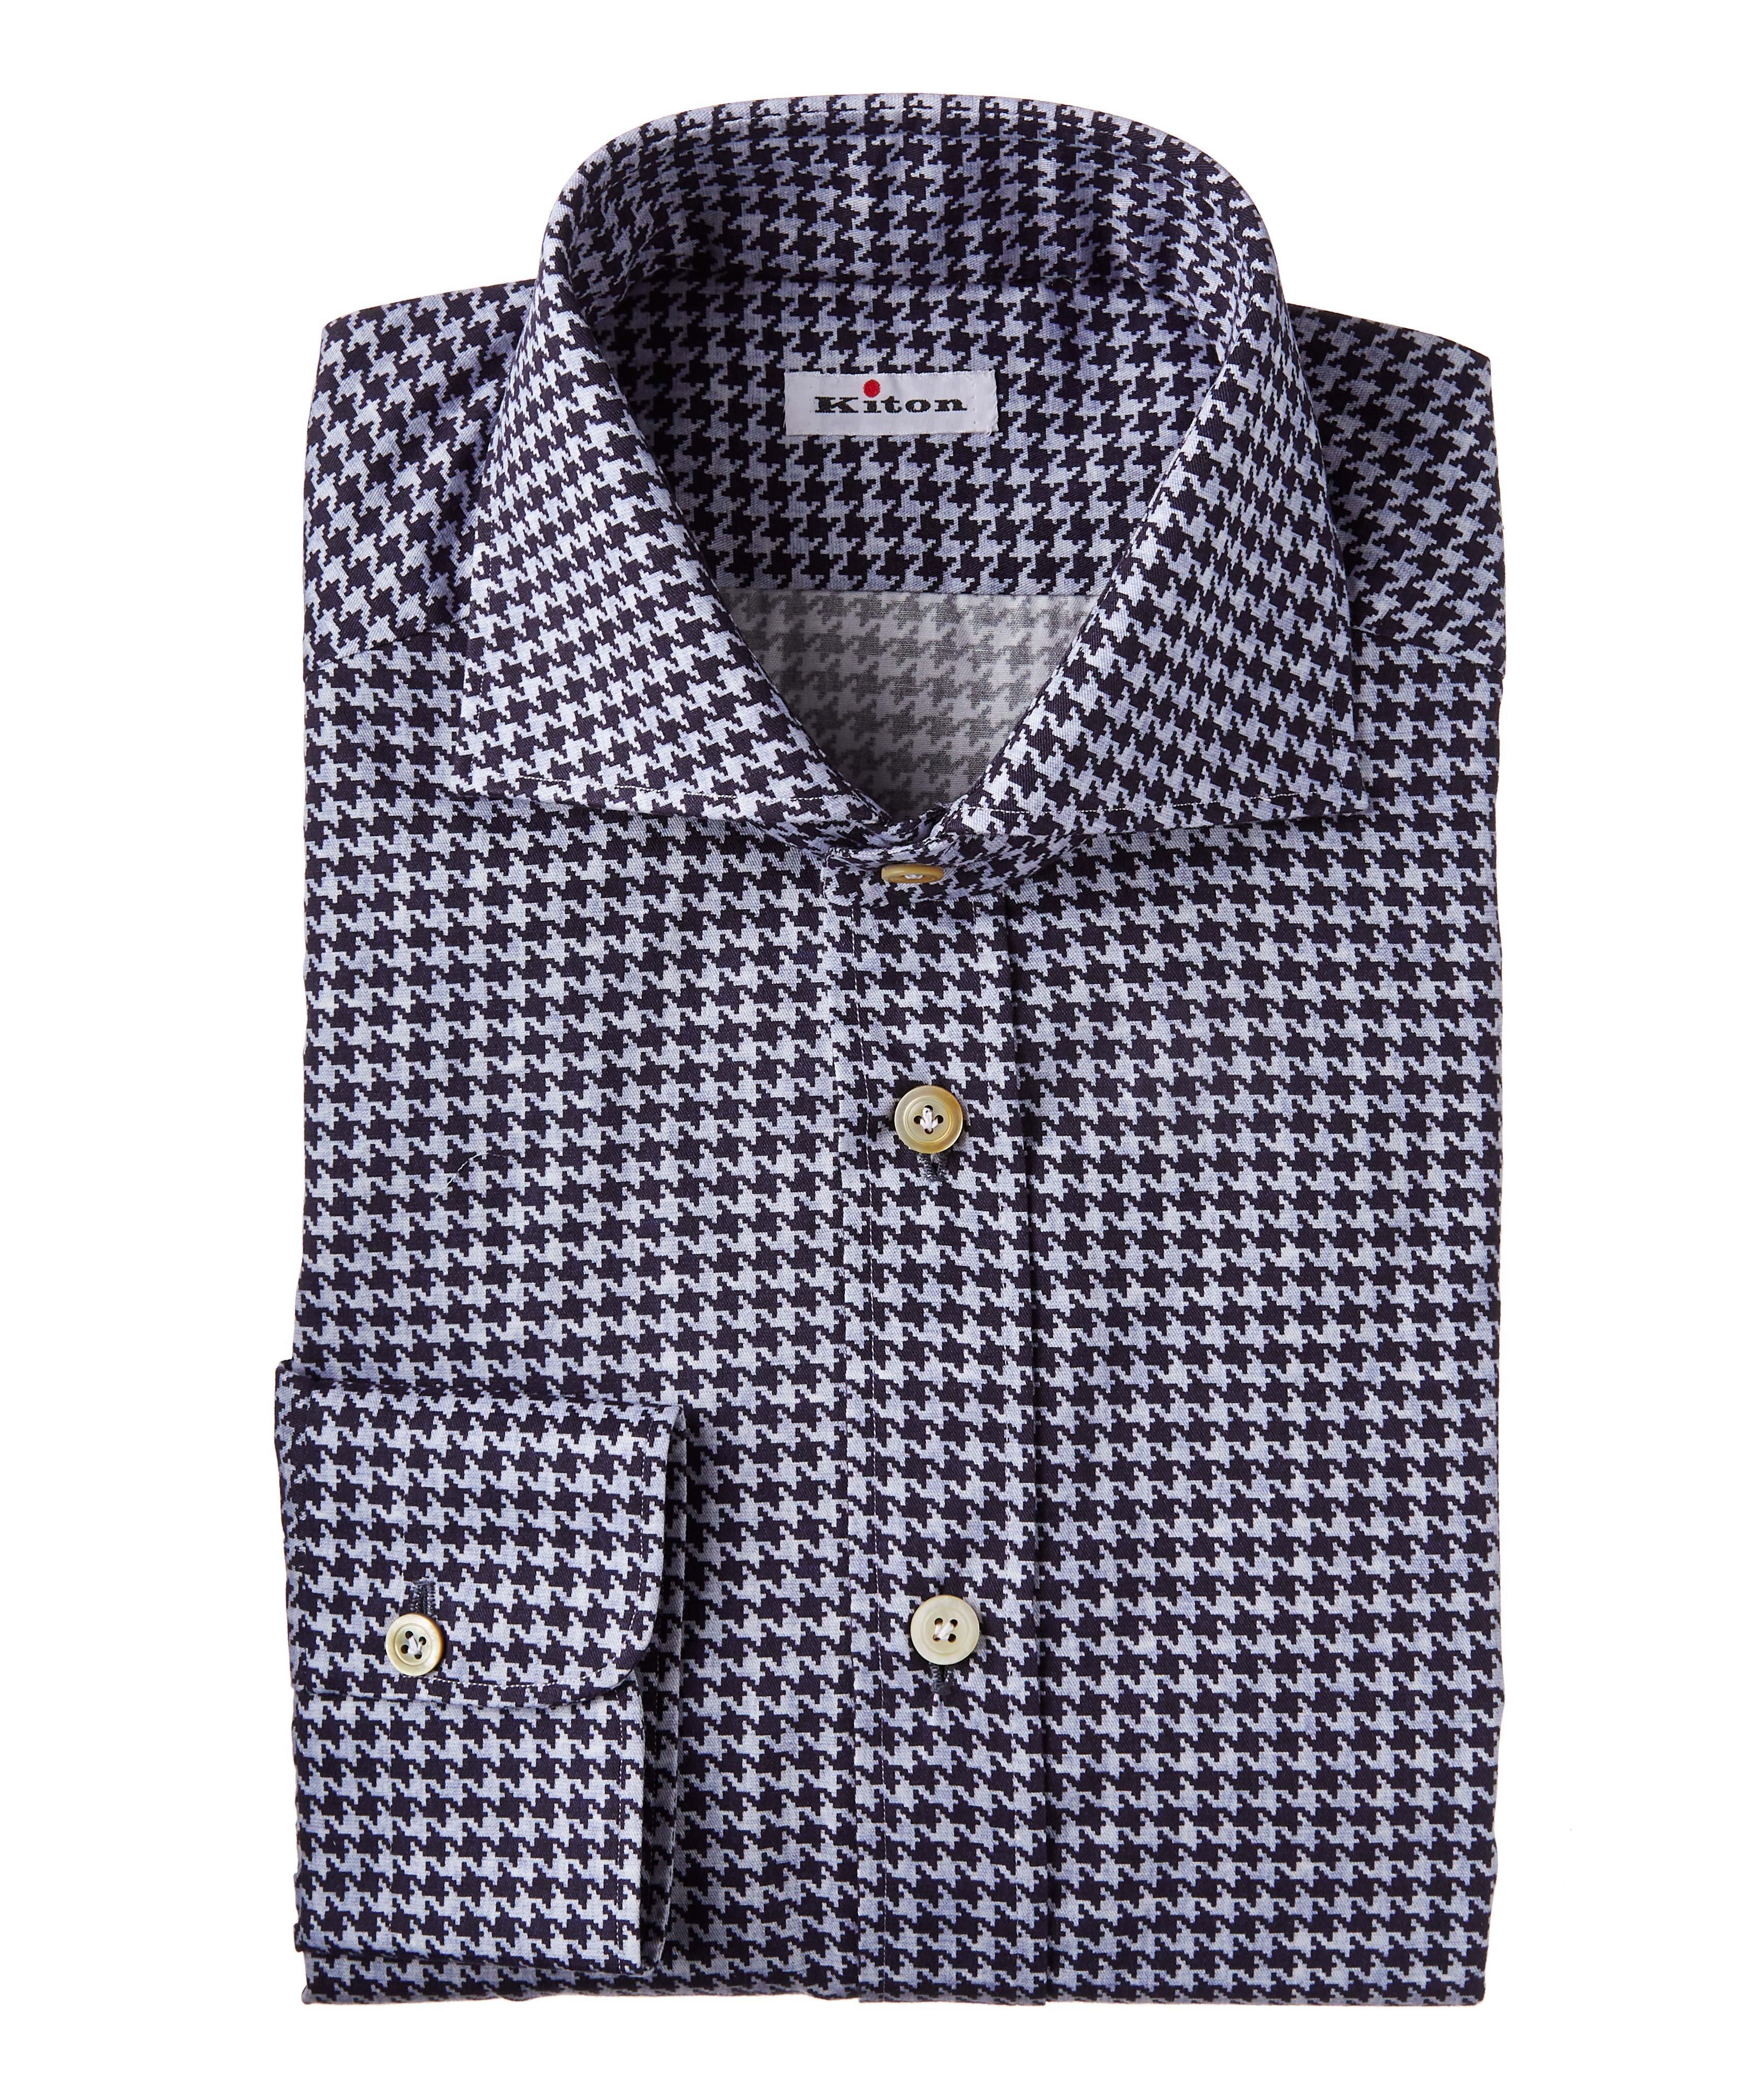 Houndstooth Cotton Shirt image 0